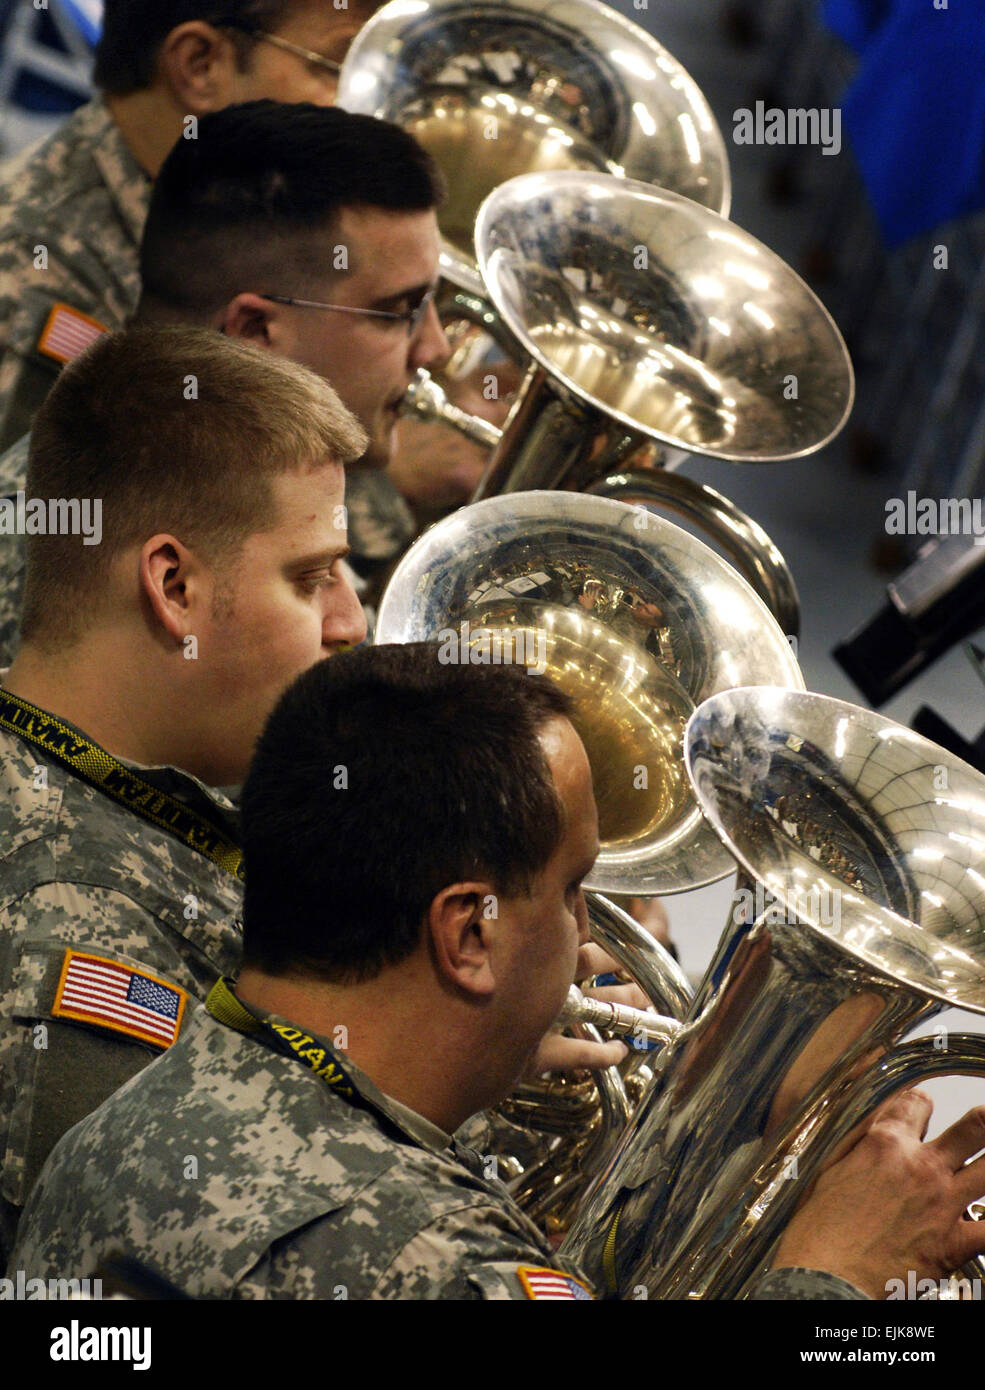 U.S. Army Soldiers from the 38th Infantry Division Band perform during a going away ceremony for fellow Soldiers at the RCA Dome in Indianapolis, Ind. The Indiana National Guard is preparing to deploy its largest amount of Soldiers since World War II with more than 3,400 Soldiers scheduled to depart for Iraq to serve during their 12-month rotation.  Staff Sgt. Russell Klika Stock Photo